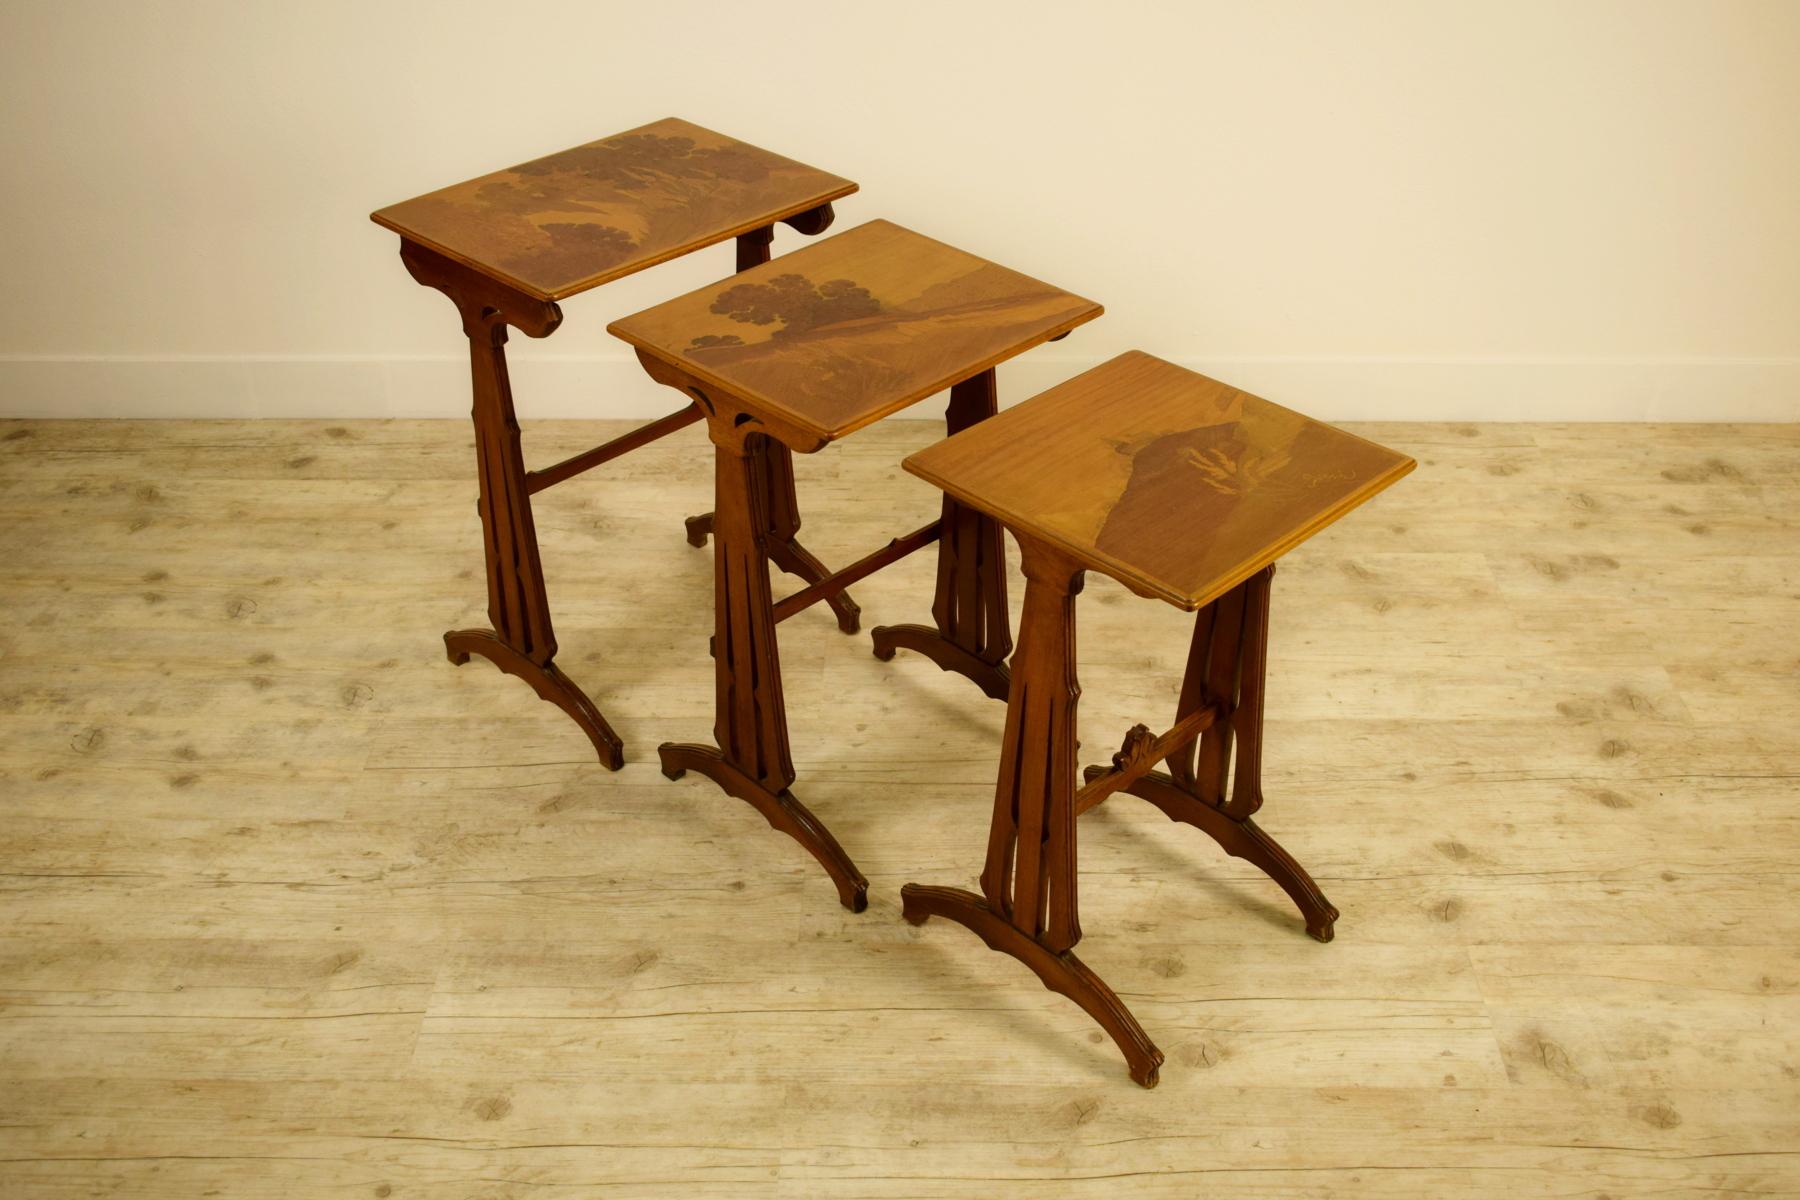 20th century, three French nesting wood coffee tables by Emile Gallè (1846-1904) 
signed on each tray with very pretty Japanese-style signatures.

Sizes:
large coffee table: W cm 50, D cm 39, H cm 69
medium coffee tables: W cm 44, D cm 38, H cm